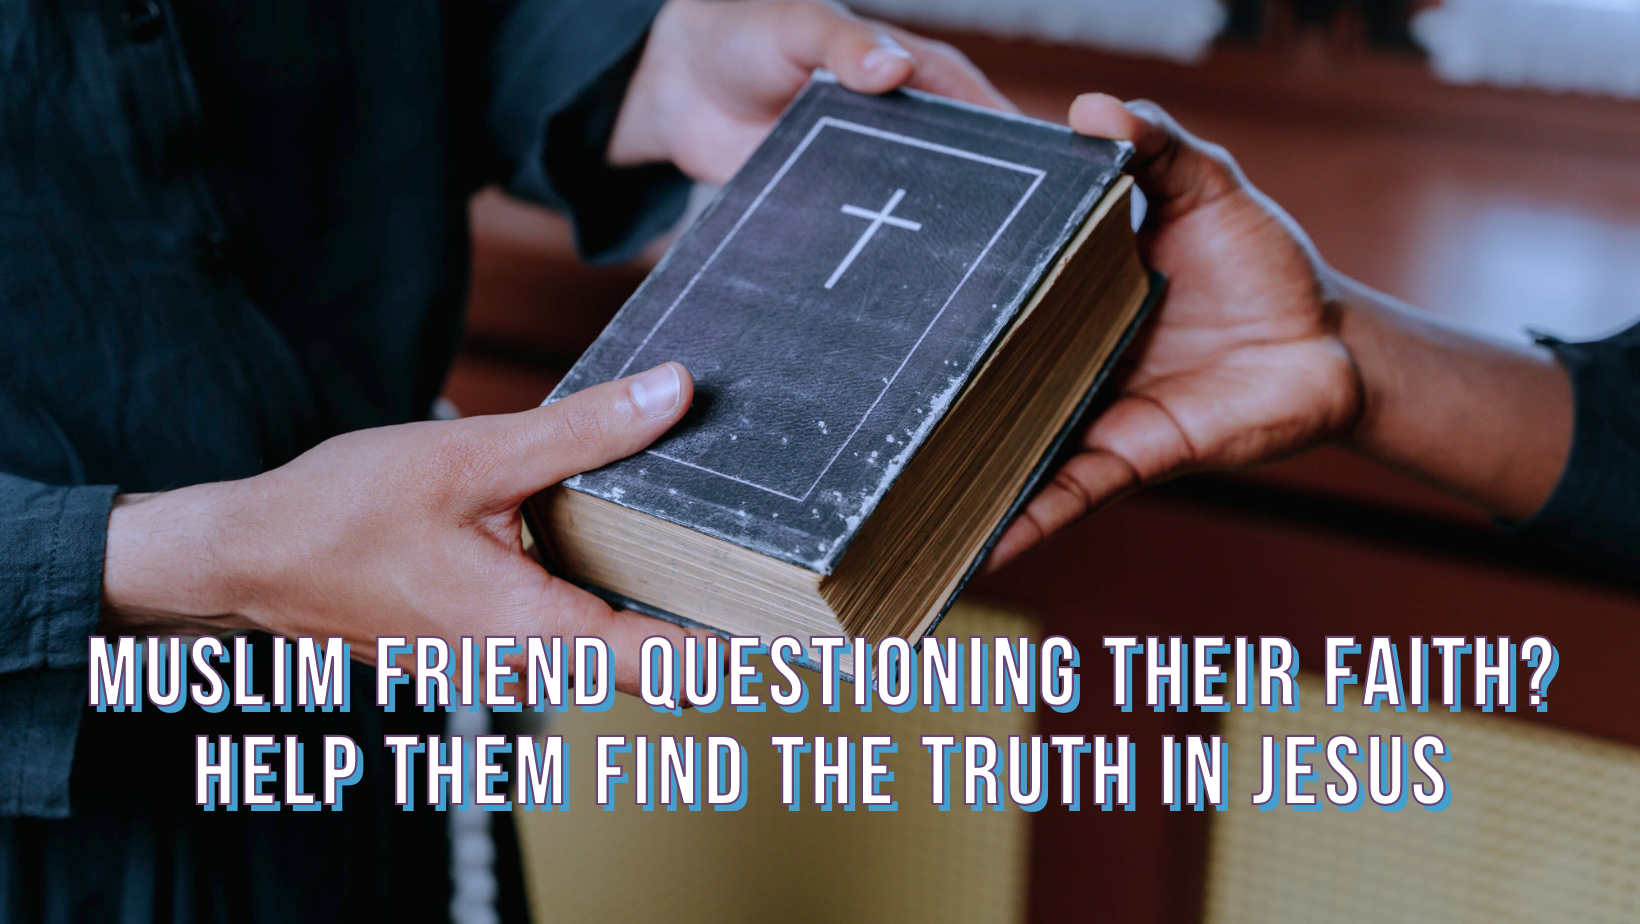 Muslim friend questioning their faith? Help them find the truth in Jesus